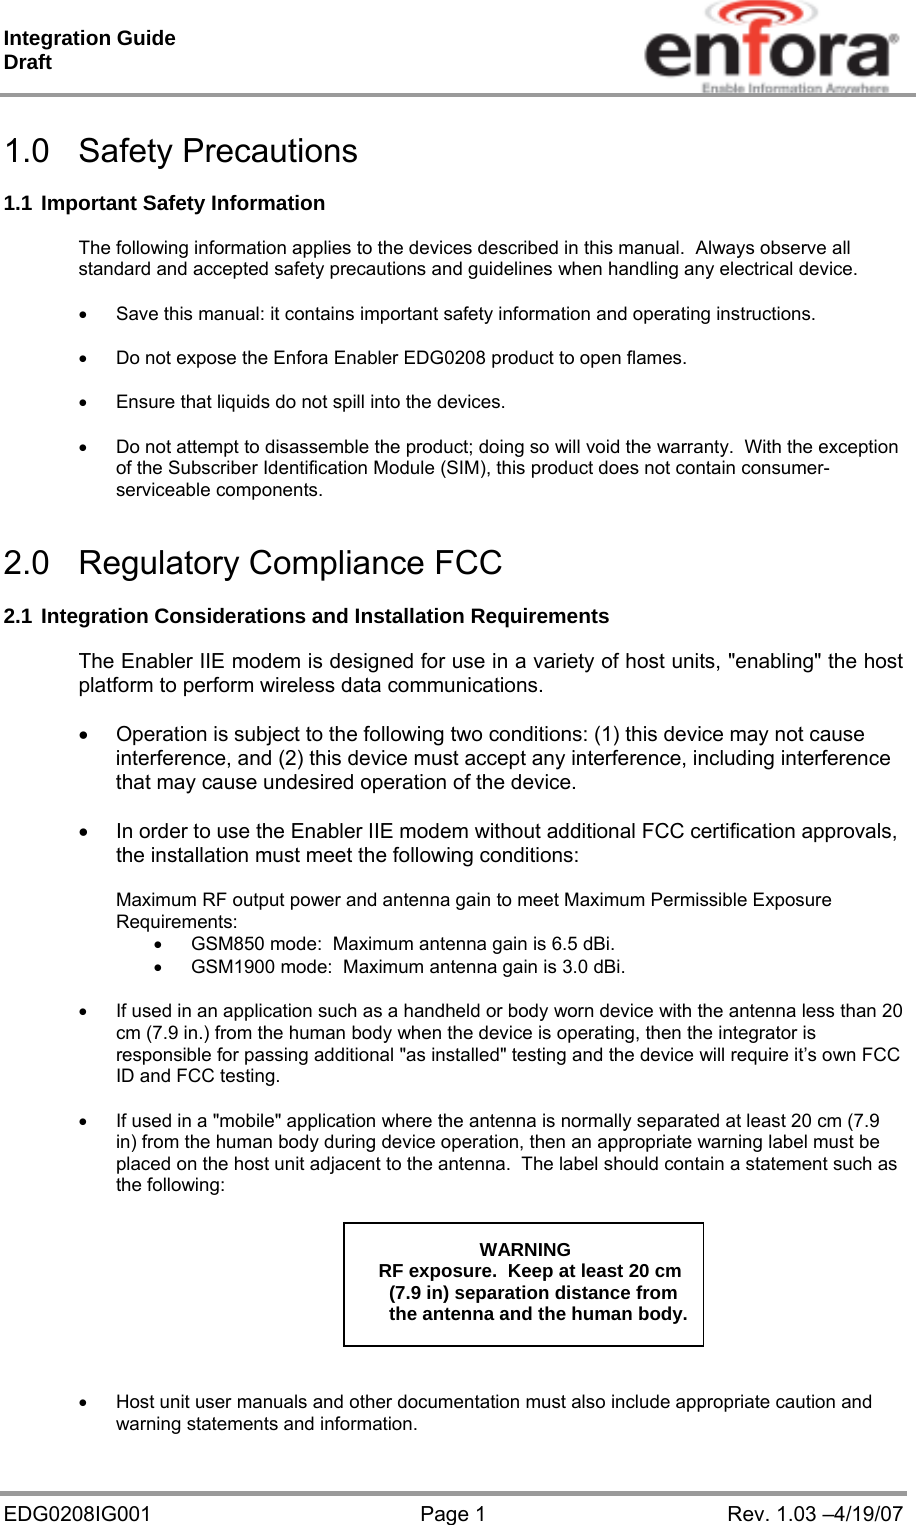 Integration Guide  Draft EDG0208IG001  Page 1  Rev. 1.03 –4/19/07  1.0 Safety Precautions  1.1 Important Safety Information  The following information applies to the devices described in this manual.  Always observe all standard and accepted safety precautions and guidelines when handling any electrical device.    Save this manual: it contains important safety information and operating instructions.    Do not expose the Enfora Enabler EDG0208 product to open flames.    Ensure that liquids do not spill into the devices.    Do not attempt to disassemble the product; doing so will void the warranty.  With the exception of the Subscriber Identification Module (SIM), this product does not contain consumer-serviceable components.   2.0 Regulatory Compliance FCC   2.1 Integration Considerations and Installation Requirements  The Enabler IIE modem is designed for use in a variety of host units, &quot;enabling&quot; the host platform to perform wireless data communications.    Operation is subject to the following two conditions: (1) this device may not cause interference, and (2) this device must accept any interference, including interference that may cause undesired operation of the device.    In order to use the Enabler IIE modem without additional FCC certification approvals, the installation must meet the following conditions:  Maximum RF output power and antenna gain to meet Maximum Permissible Exposure Requirements:    GSM850 mode:  Maximum antenna gain is 6.5 dBi.    GSM1900 mode:  Maximum antenna gain is 3.0 dBi.     If used in an application such as a handheld or body worn device with the antenna less than 20 cm (7.9 in.) from the human body when the device is operating, then the integrator is responsible for passing additional &quot;as installed&quot; testing and the device will require it’s own FCC ID and FCC testing.    If used in a &quot;mobile&quot; application where the antenna is normally separated at least 20 cm (7.9 in) from the human body during device operation, then an appropriate warning label must be placed on the host unit adjacent to the antenna.  The label should contain a statement such as the following:        WARNING RF exposure.  Keep at least 20 cm   (7.9 in) separation distance from   the antenna and the human body.      Host unit user manuals and other documentation must also include appropriate caution and warning statements and information. 